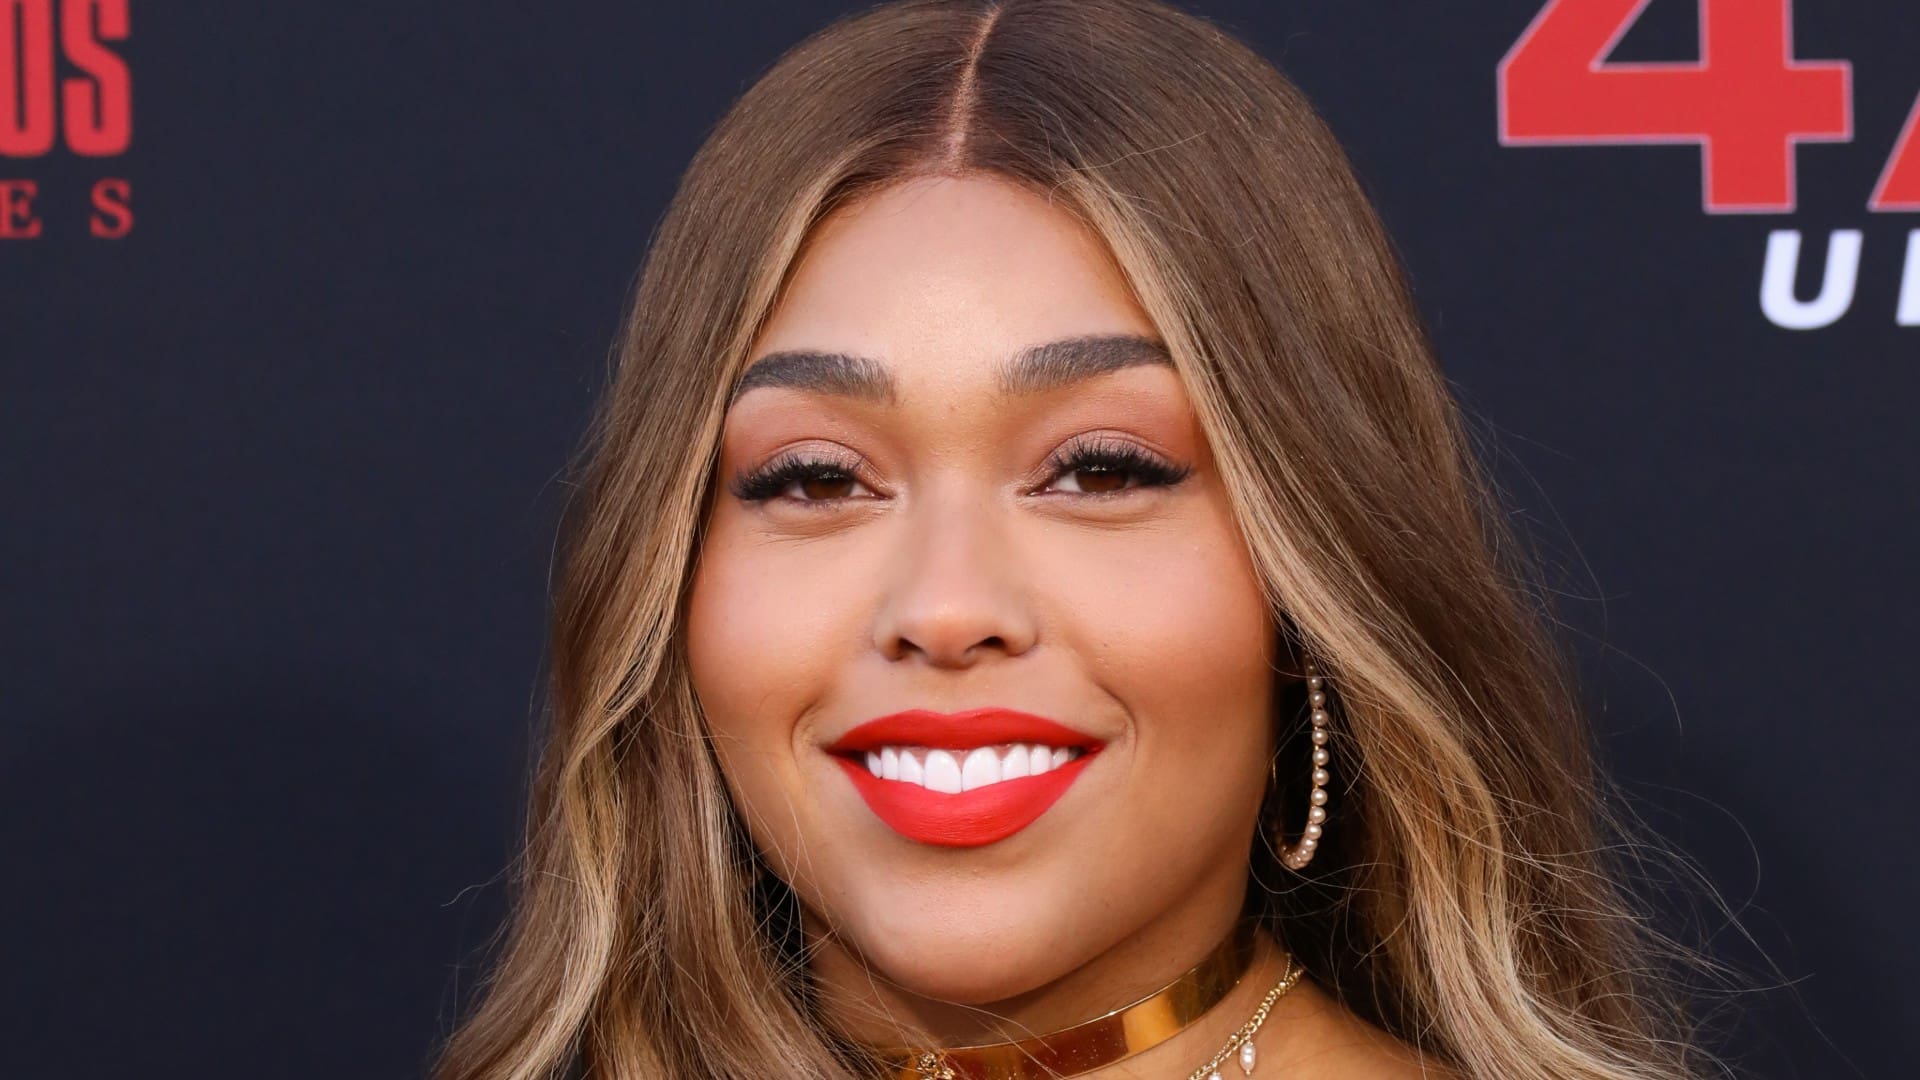 Jordyn Woods Presents The Best Horror & Thriller Film Of 2019 At The NFTA Award Show, Then Pulls Up At Roscoe's In Her Gown - See The Pics